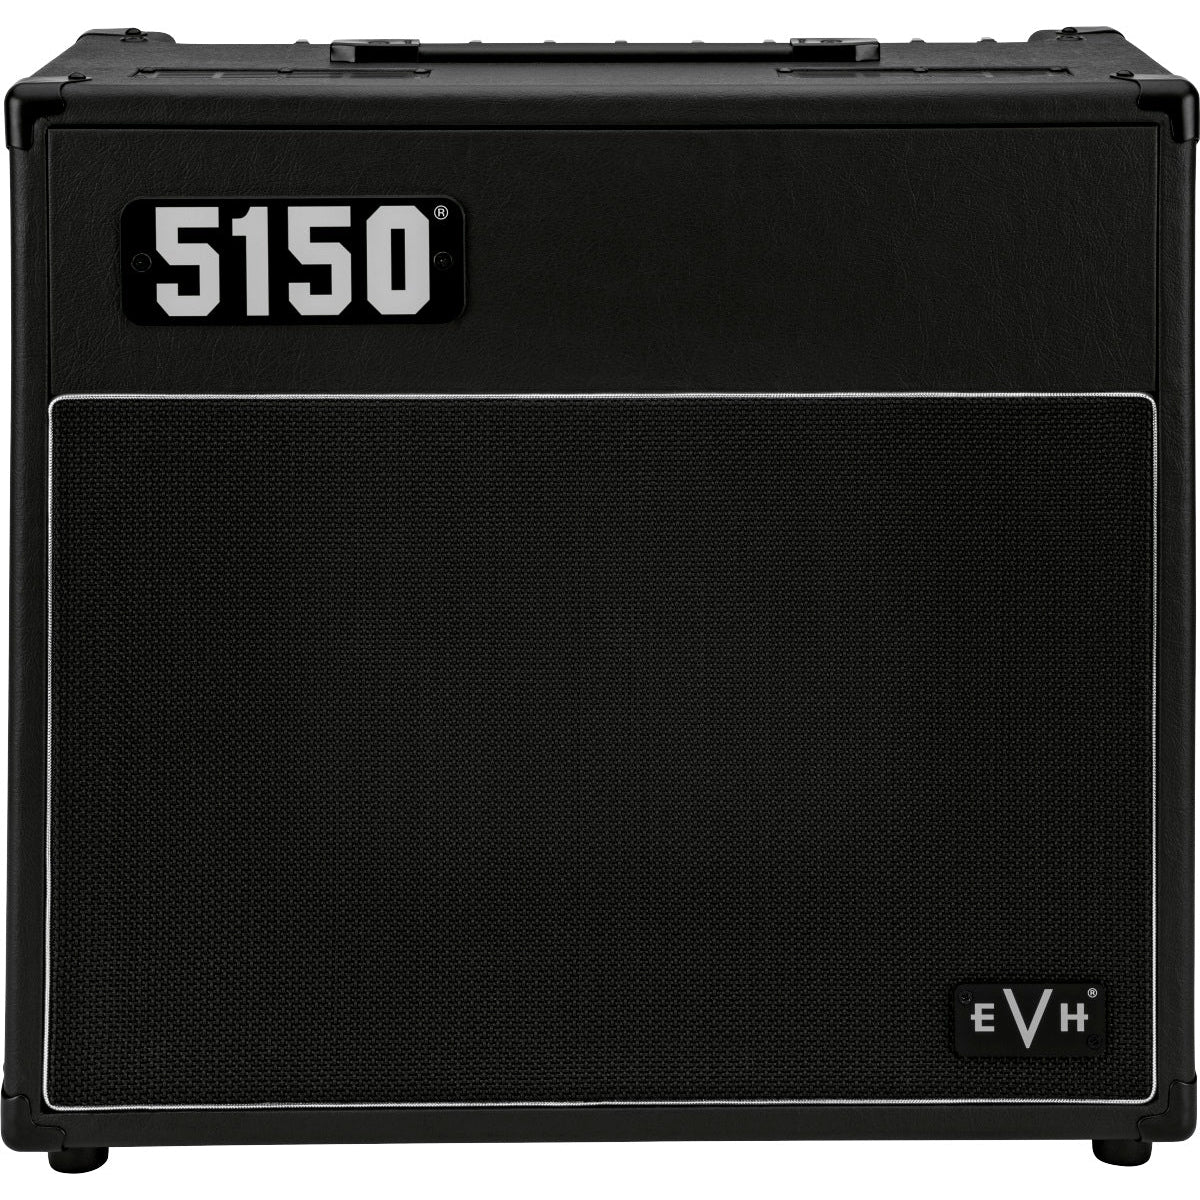 EVH 5150 Iconic Series Electric Guitar Combo Amp with 10" Speaker-15 Watts-Music World Academy